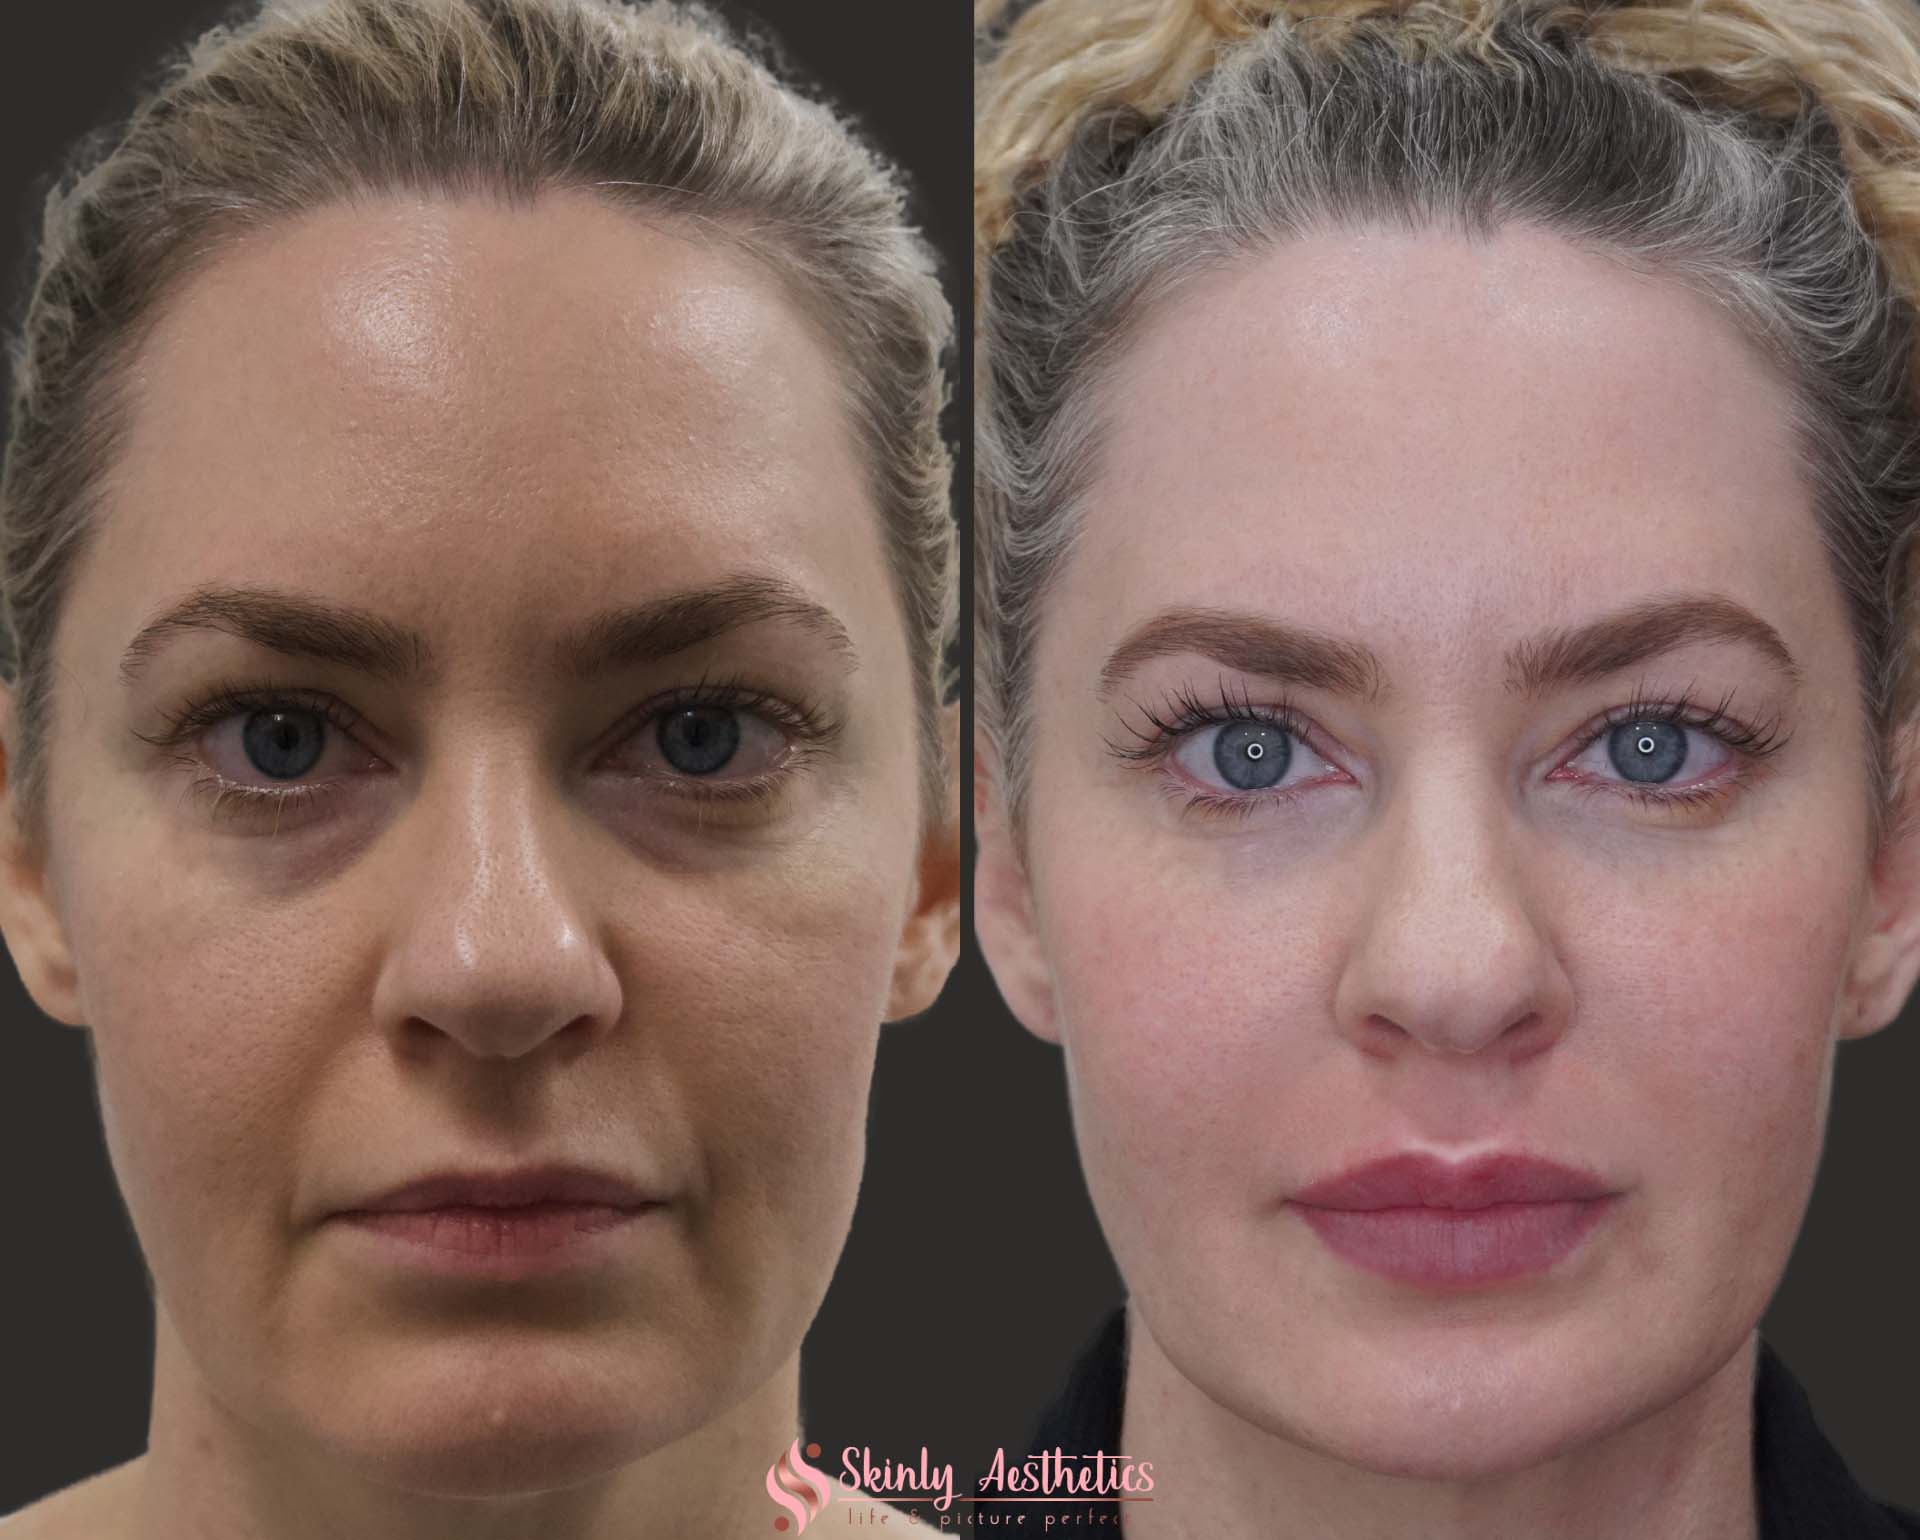 Juvederm Ultra lip filler injection before and after results